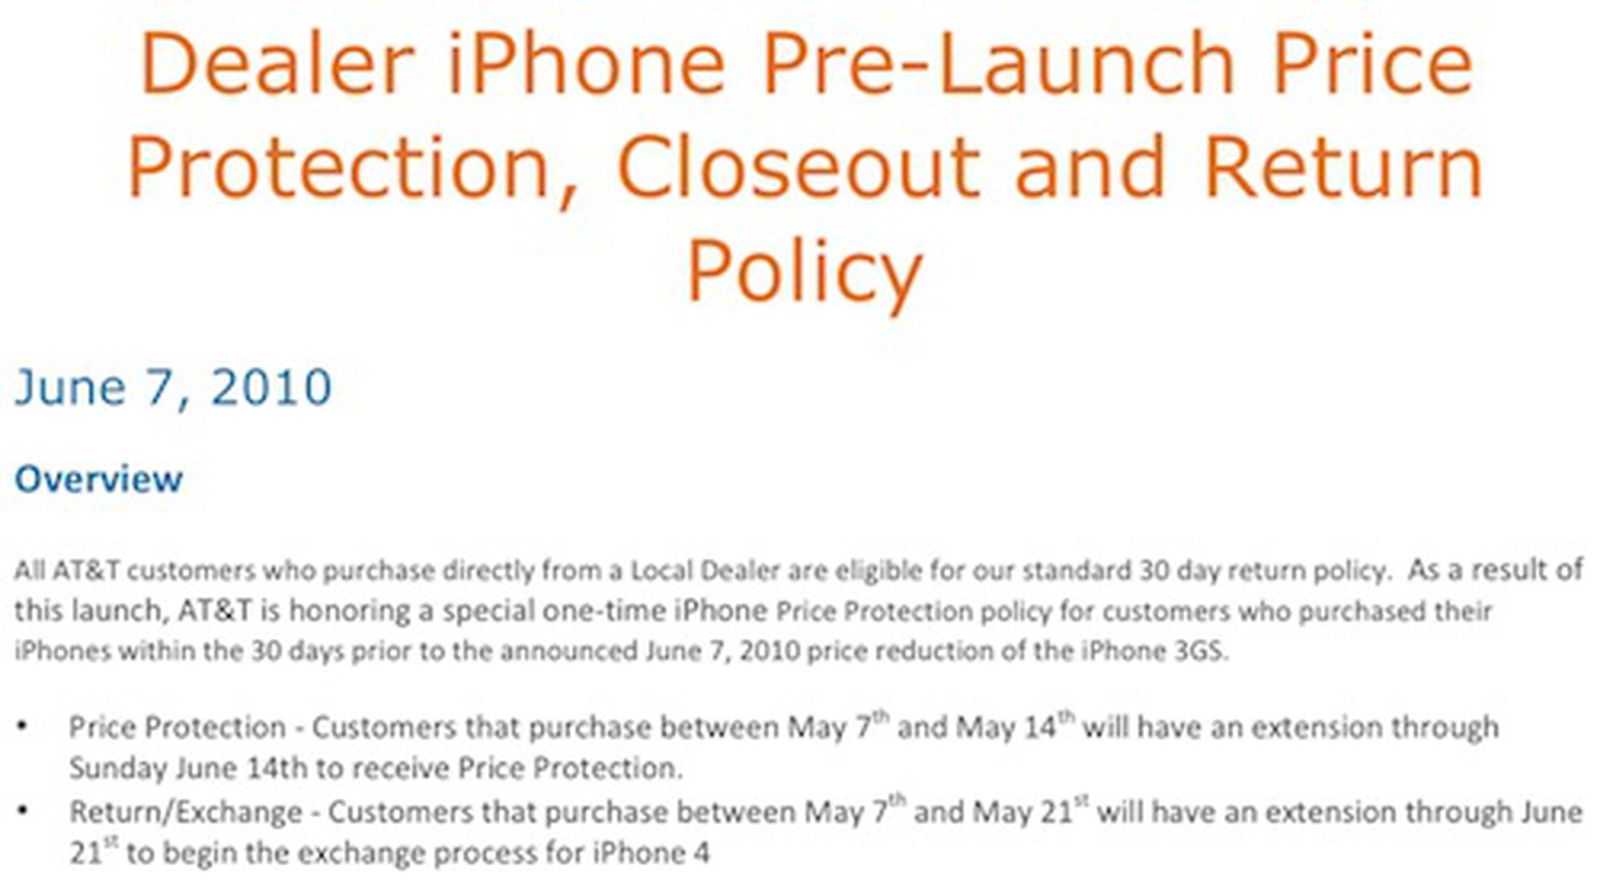 at-t-rebate-or-upgrade-for-recent-iphone-3gs-purchasers-7-am-launch